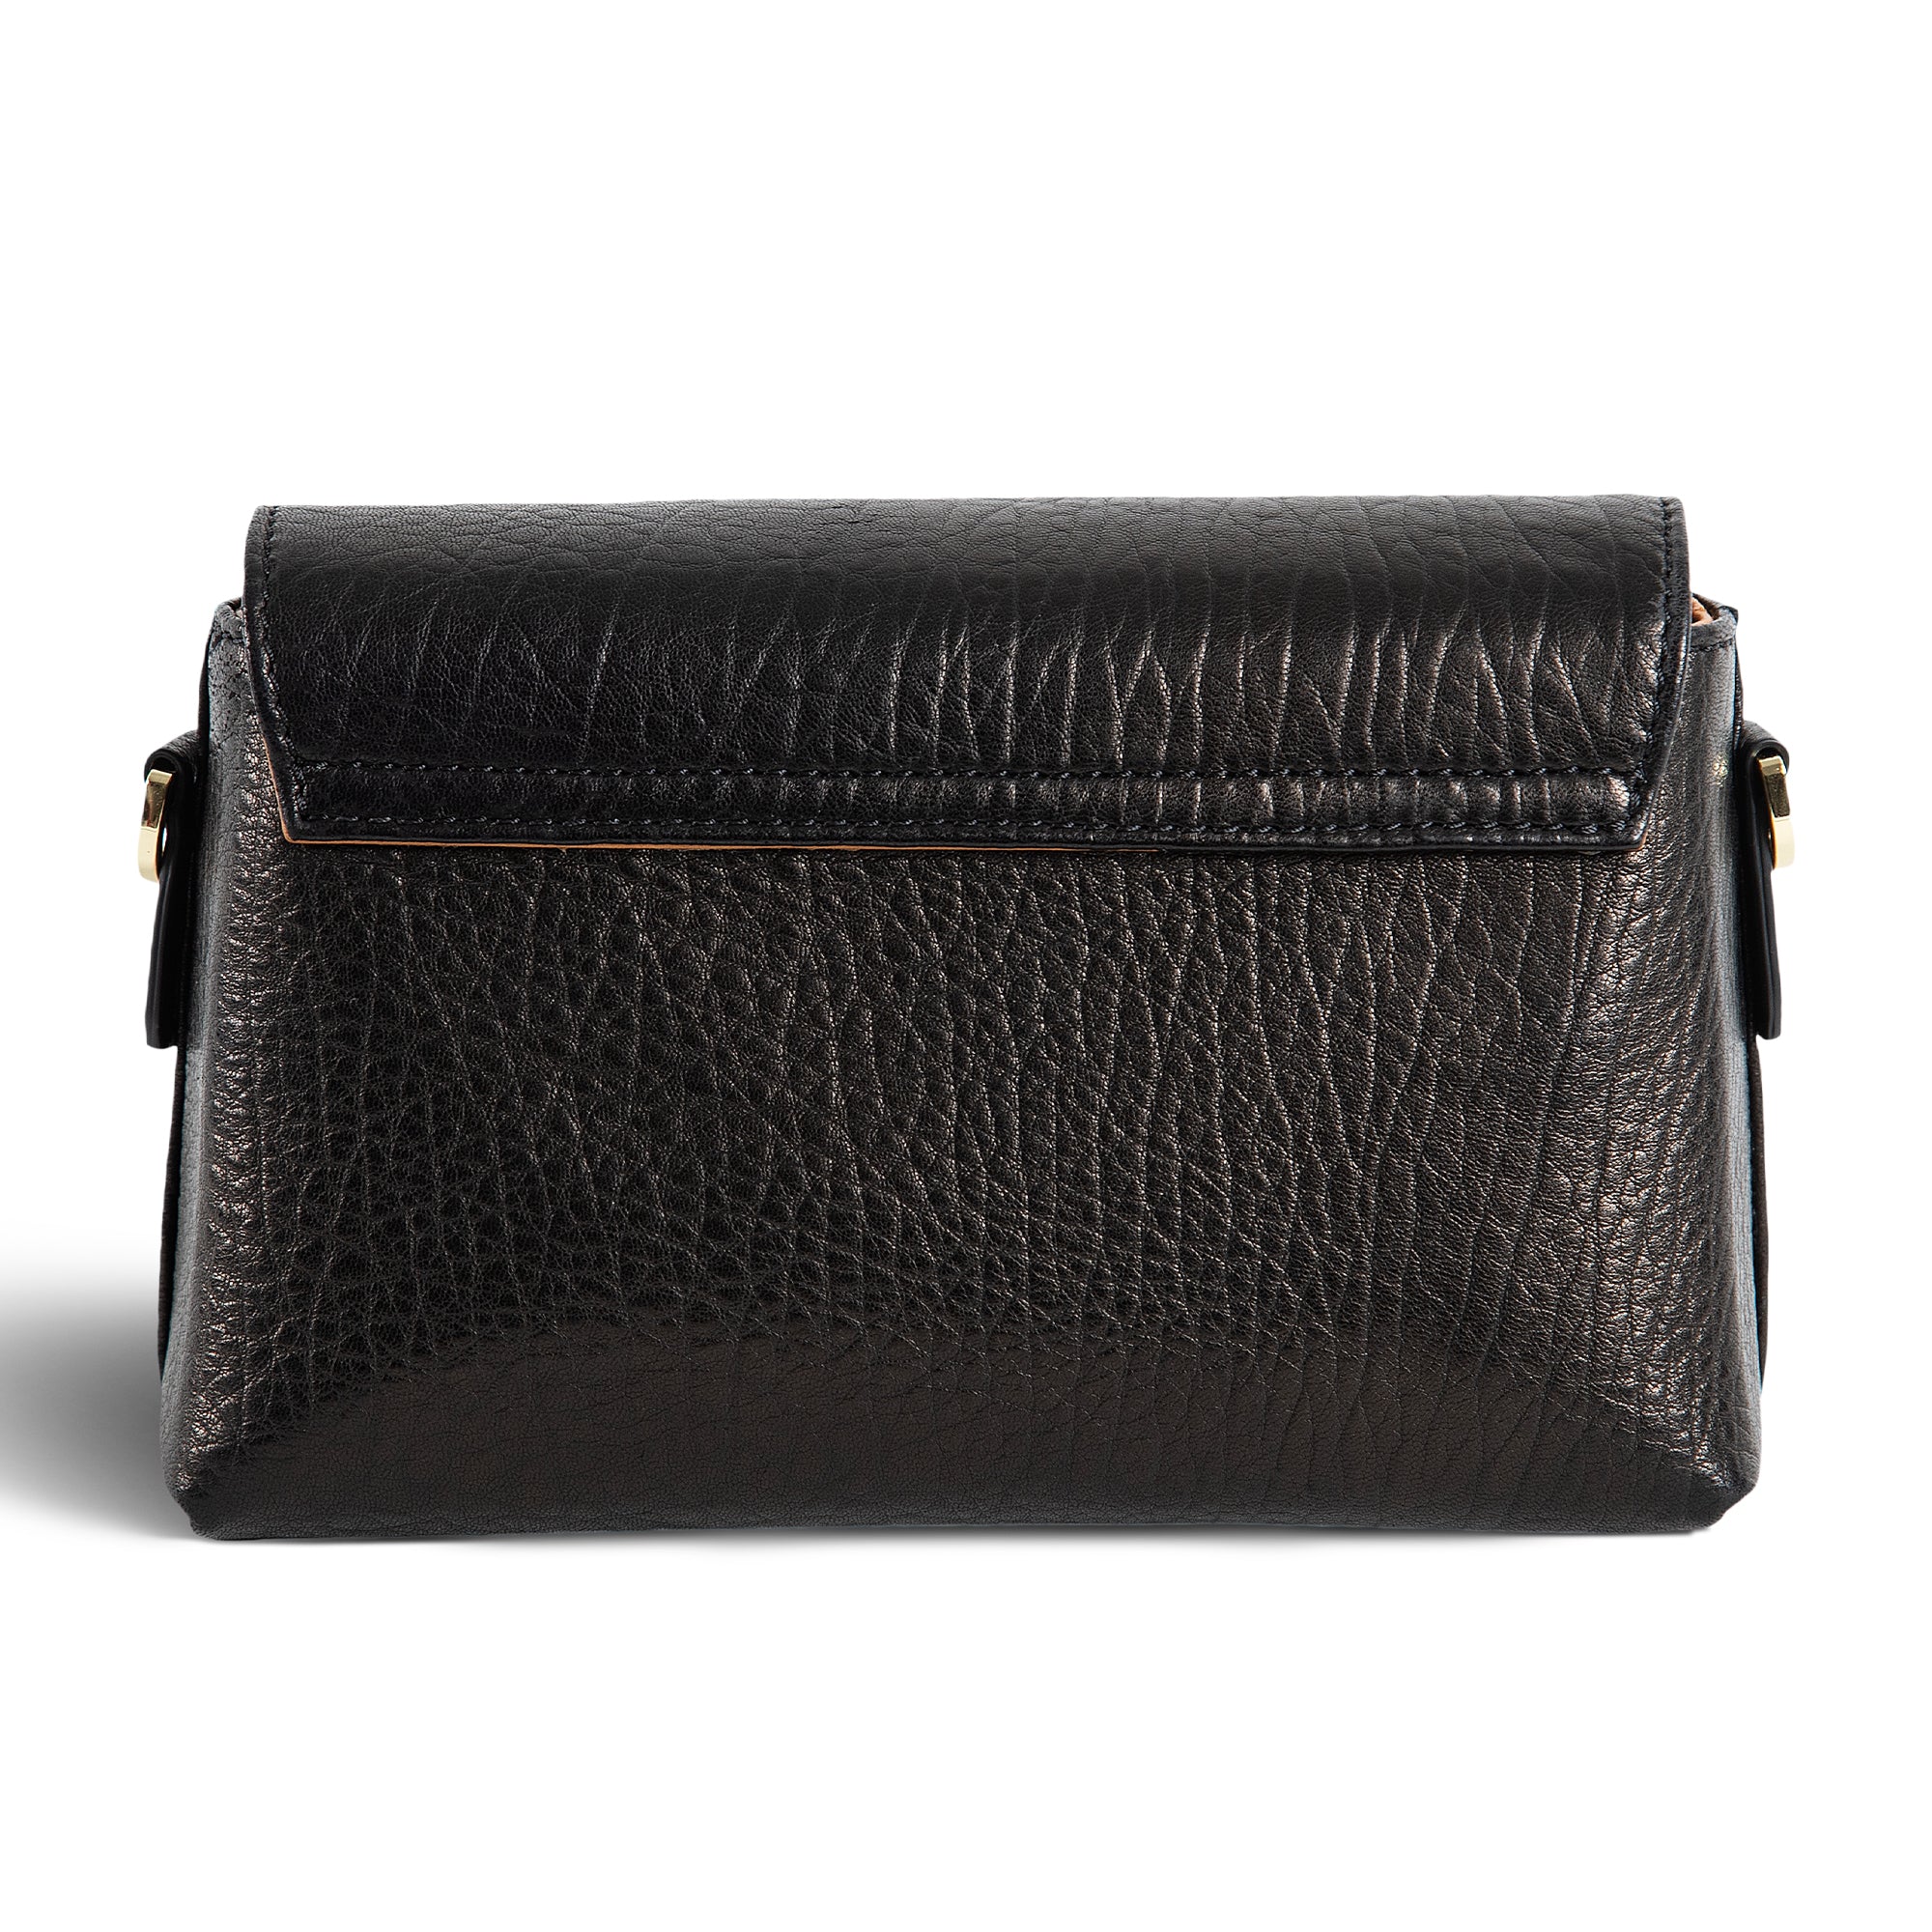 Black Vegan Leather Flap Crossbody Purse with Embroidery Strap | Baginning